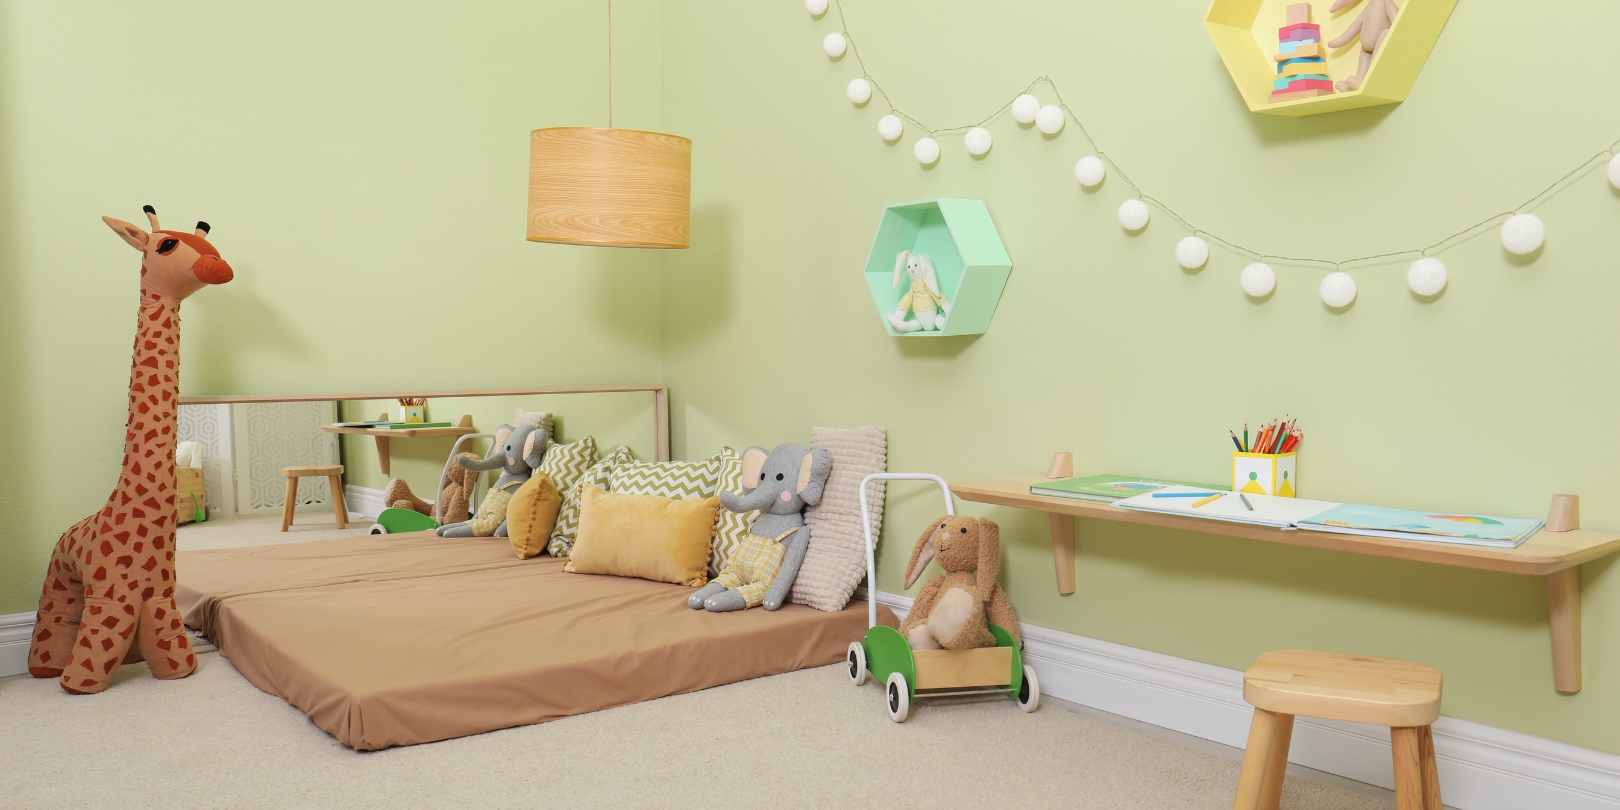 Montessori Bedroom Interior with Floor Bed and Toys